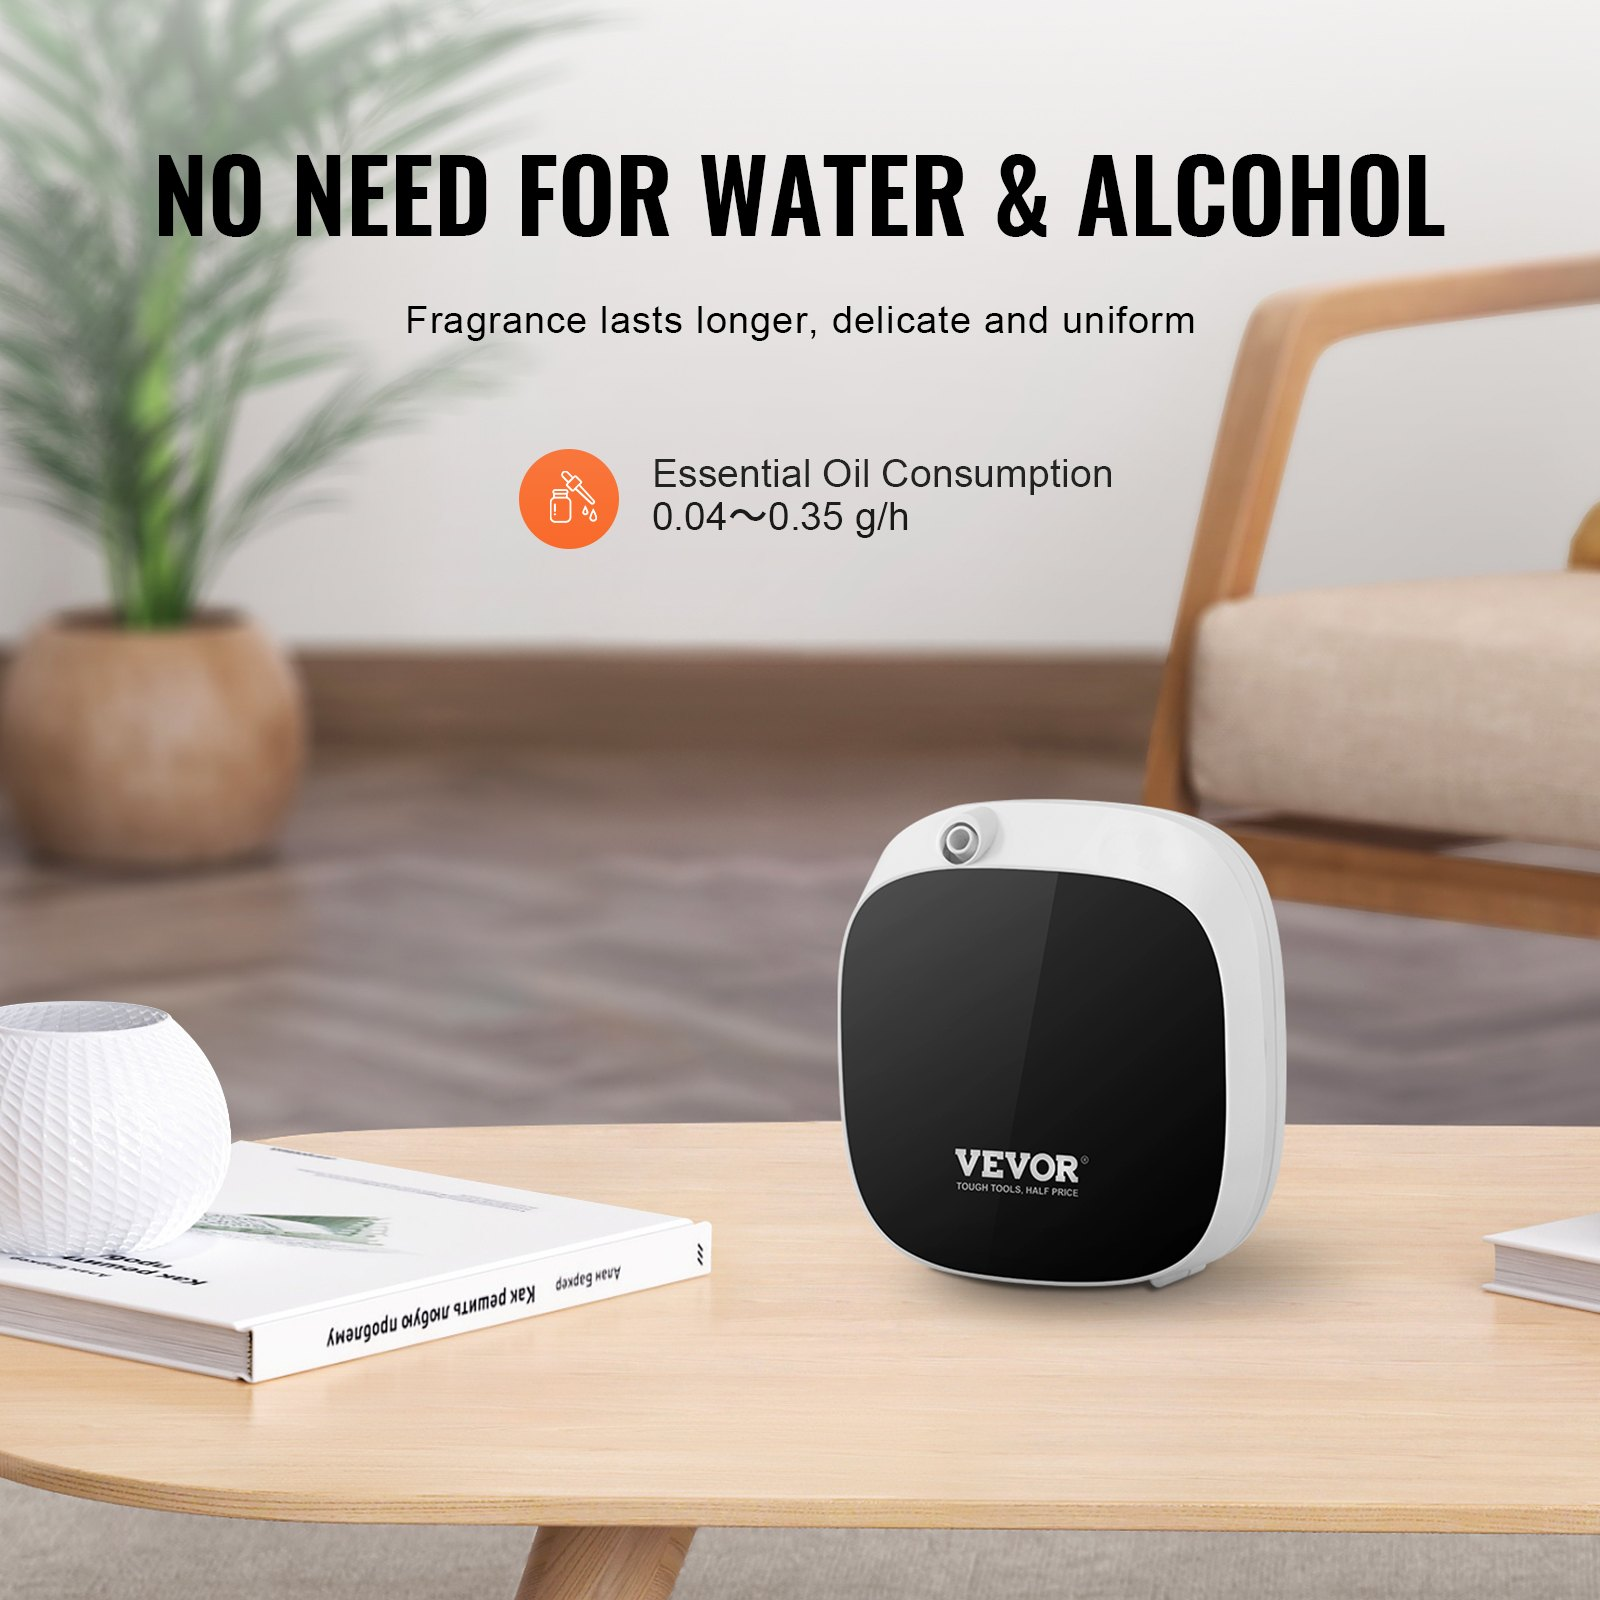 VEVOR Scent Air Machine for Home, 100ML with Cold Air Technology, Waterless Smart Essential Oil Diffuser with USB & Battery Powered, Cover Up to 1000 Sq.Ft for Living Room, Bath Room, Spa, Goodies N Stuff